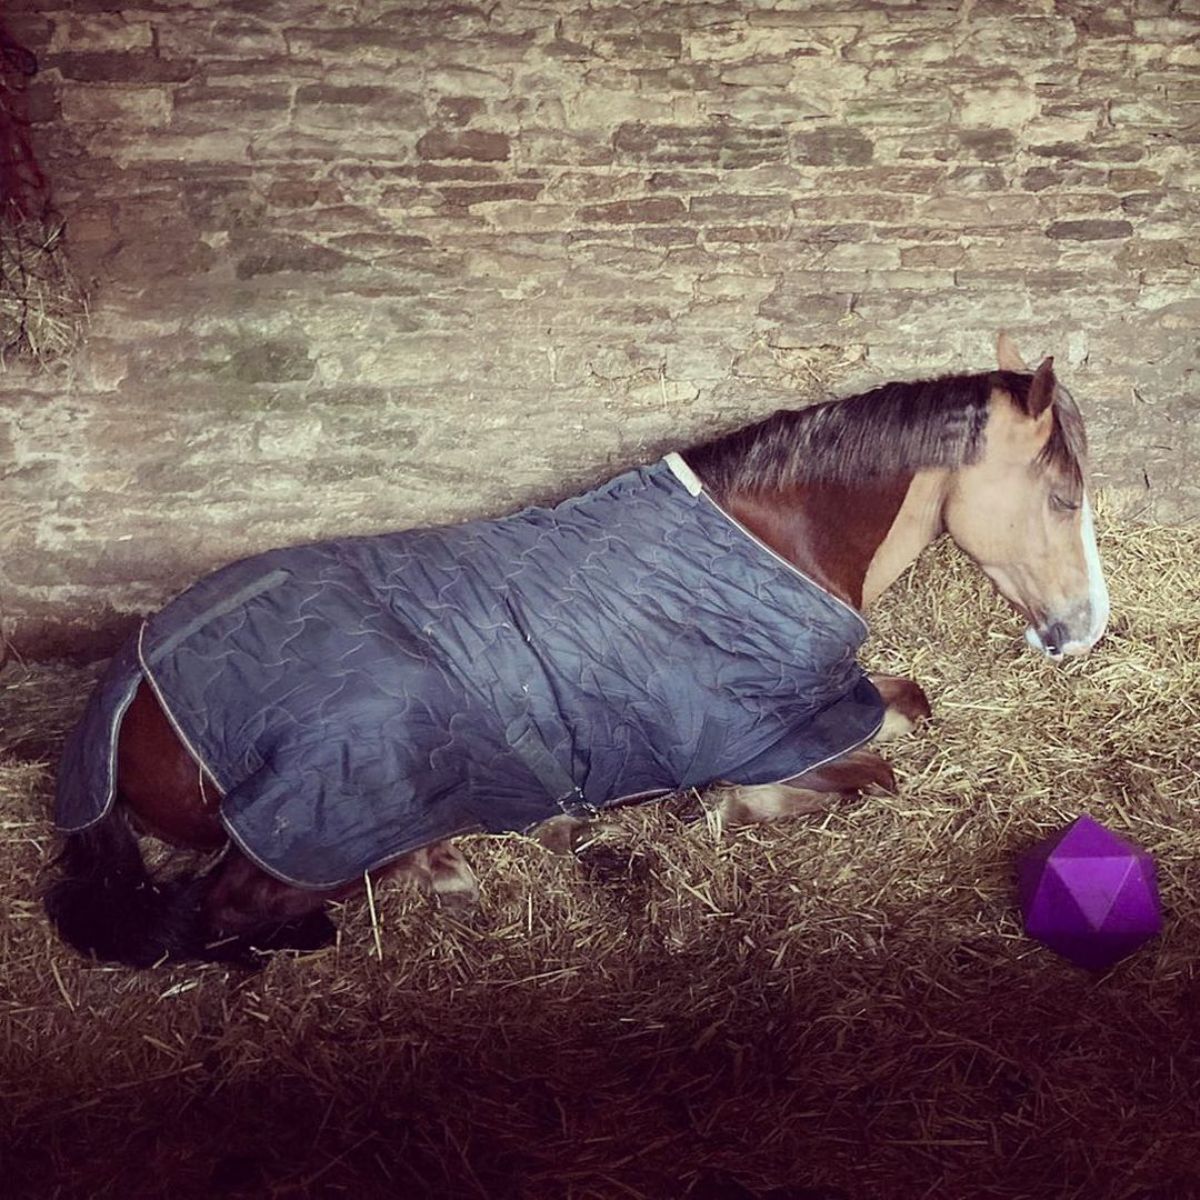 A brown horse sleeps in a stable.